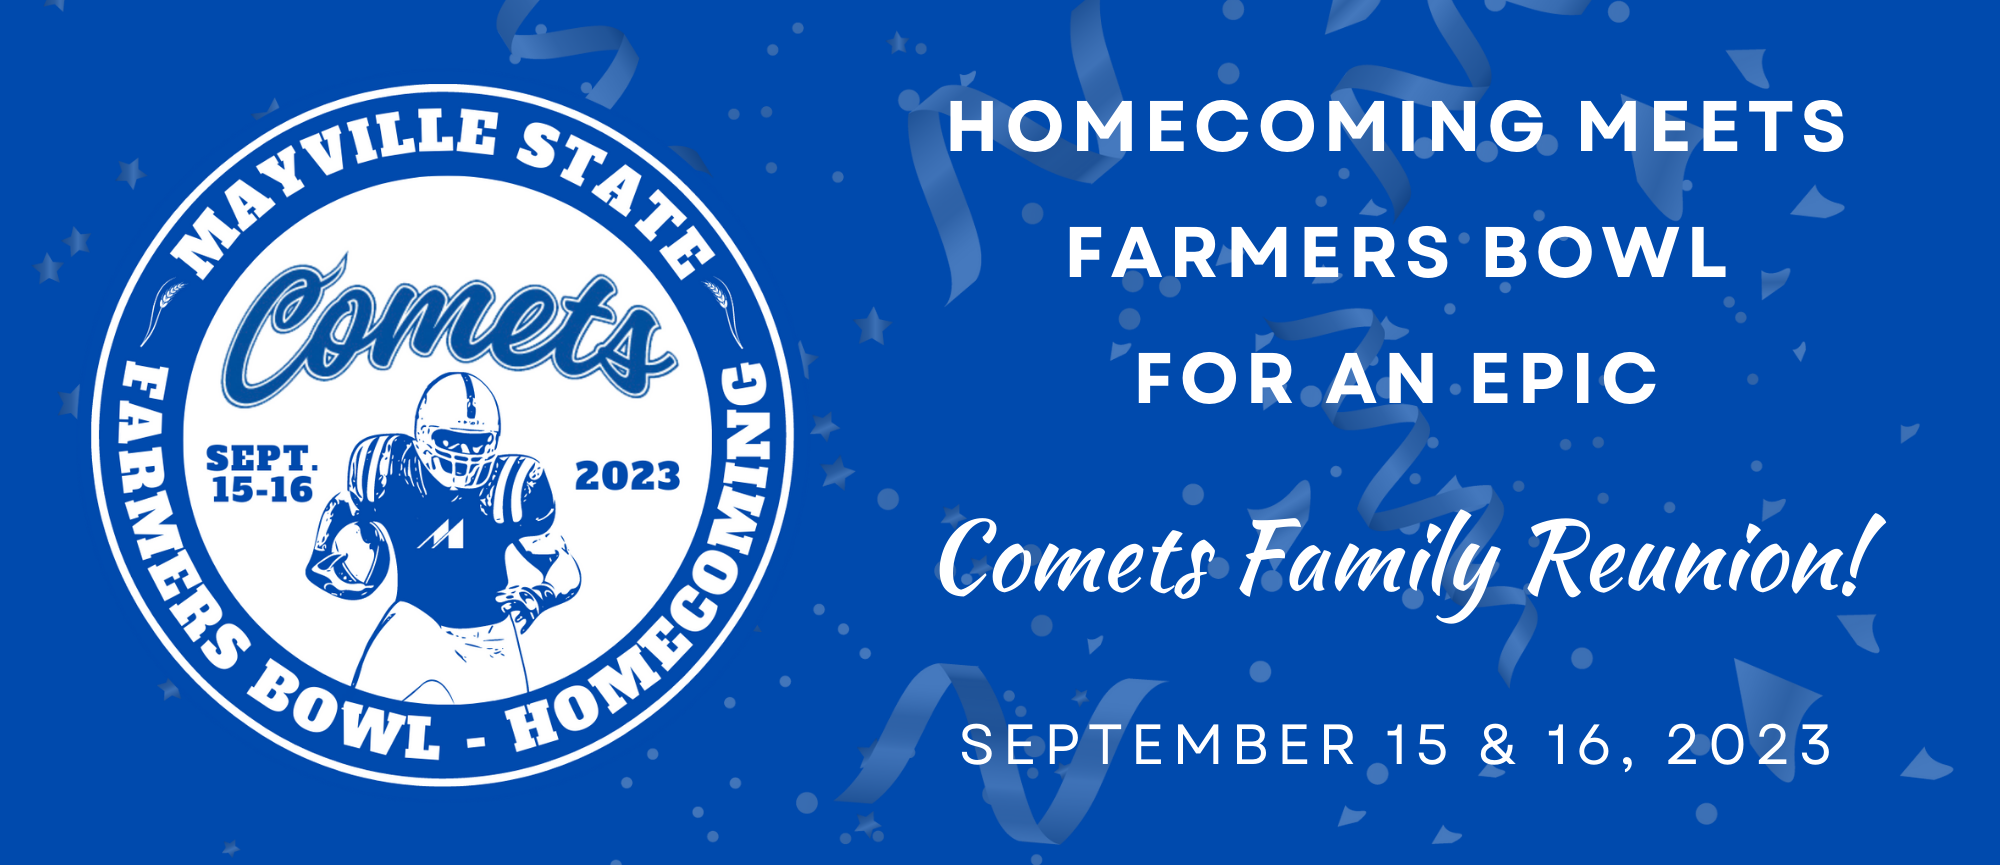 Farmers Bowl Homecoming Web Graphic 2023.png